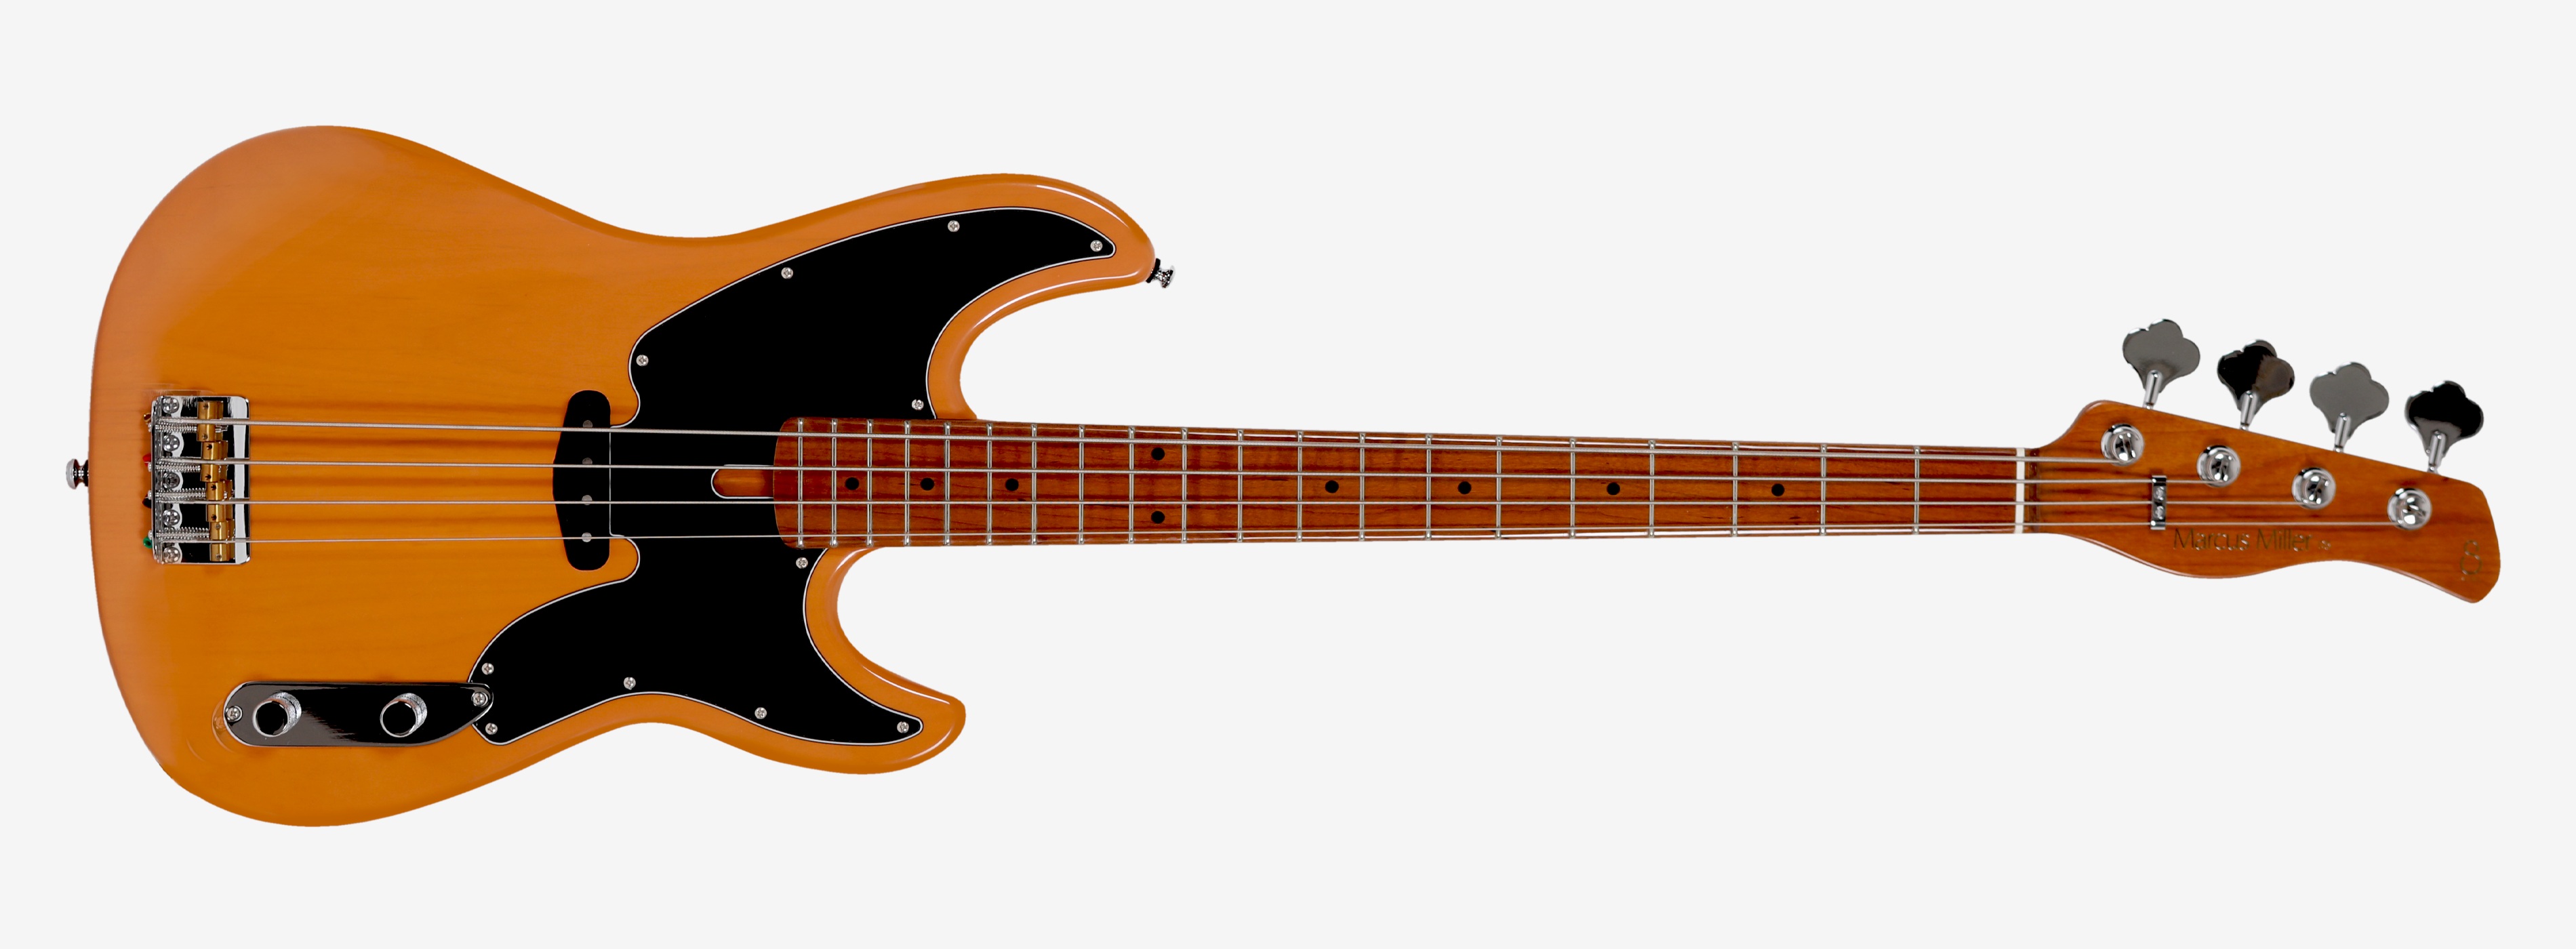 Sire Marcus Miller D5 4-String